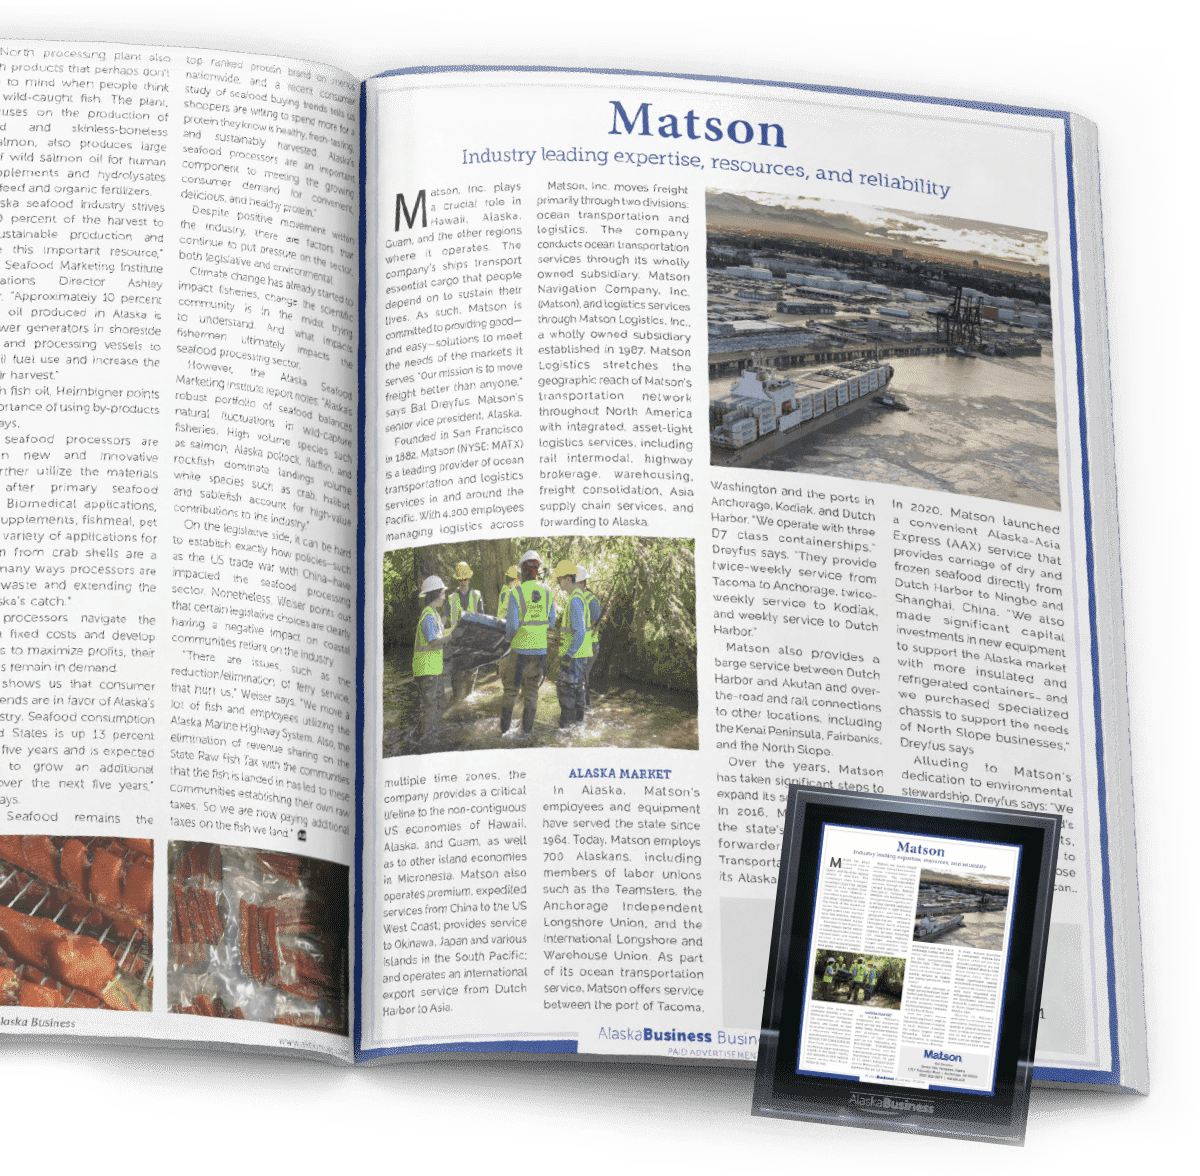 Magazine Spread and Tablet